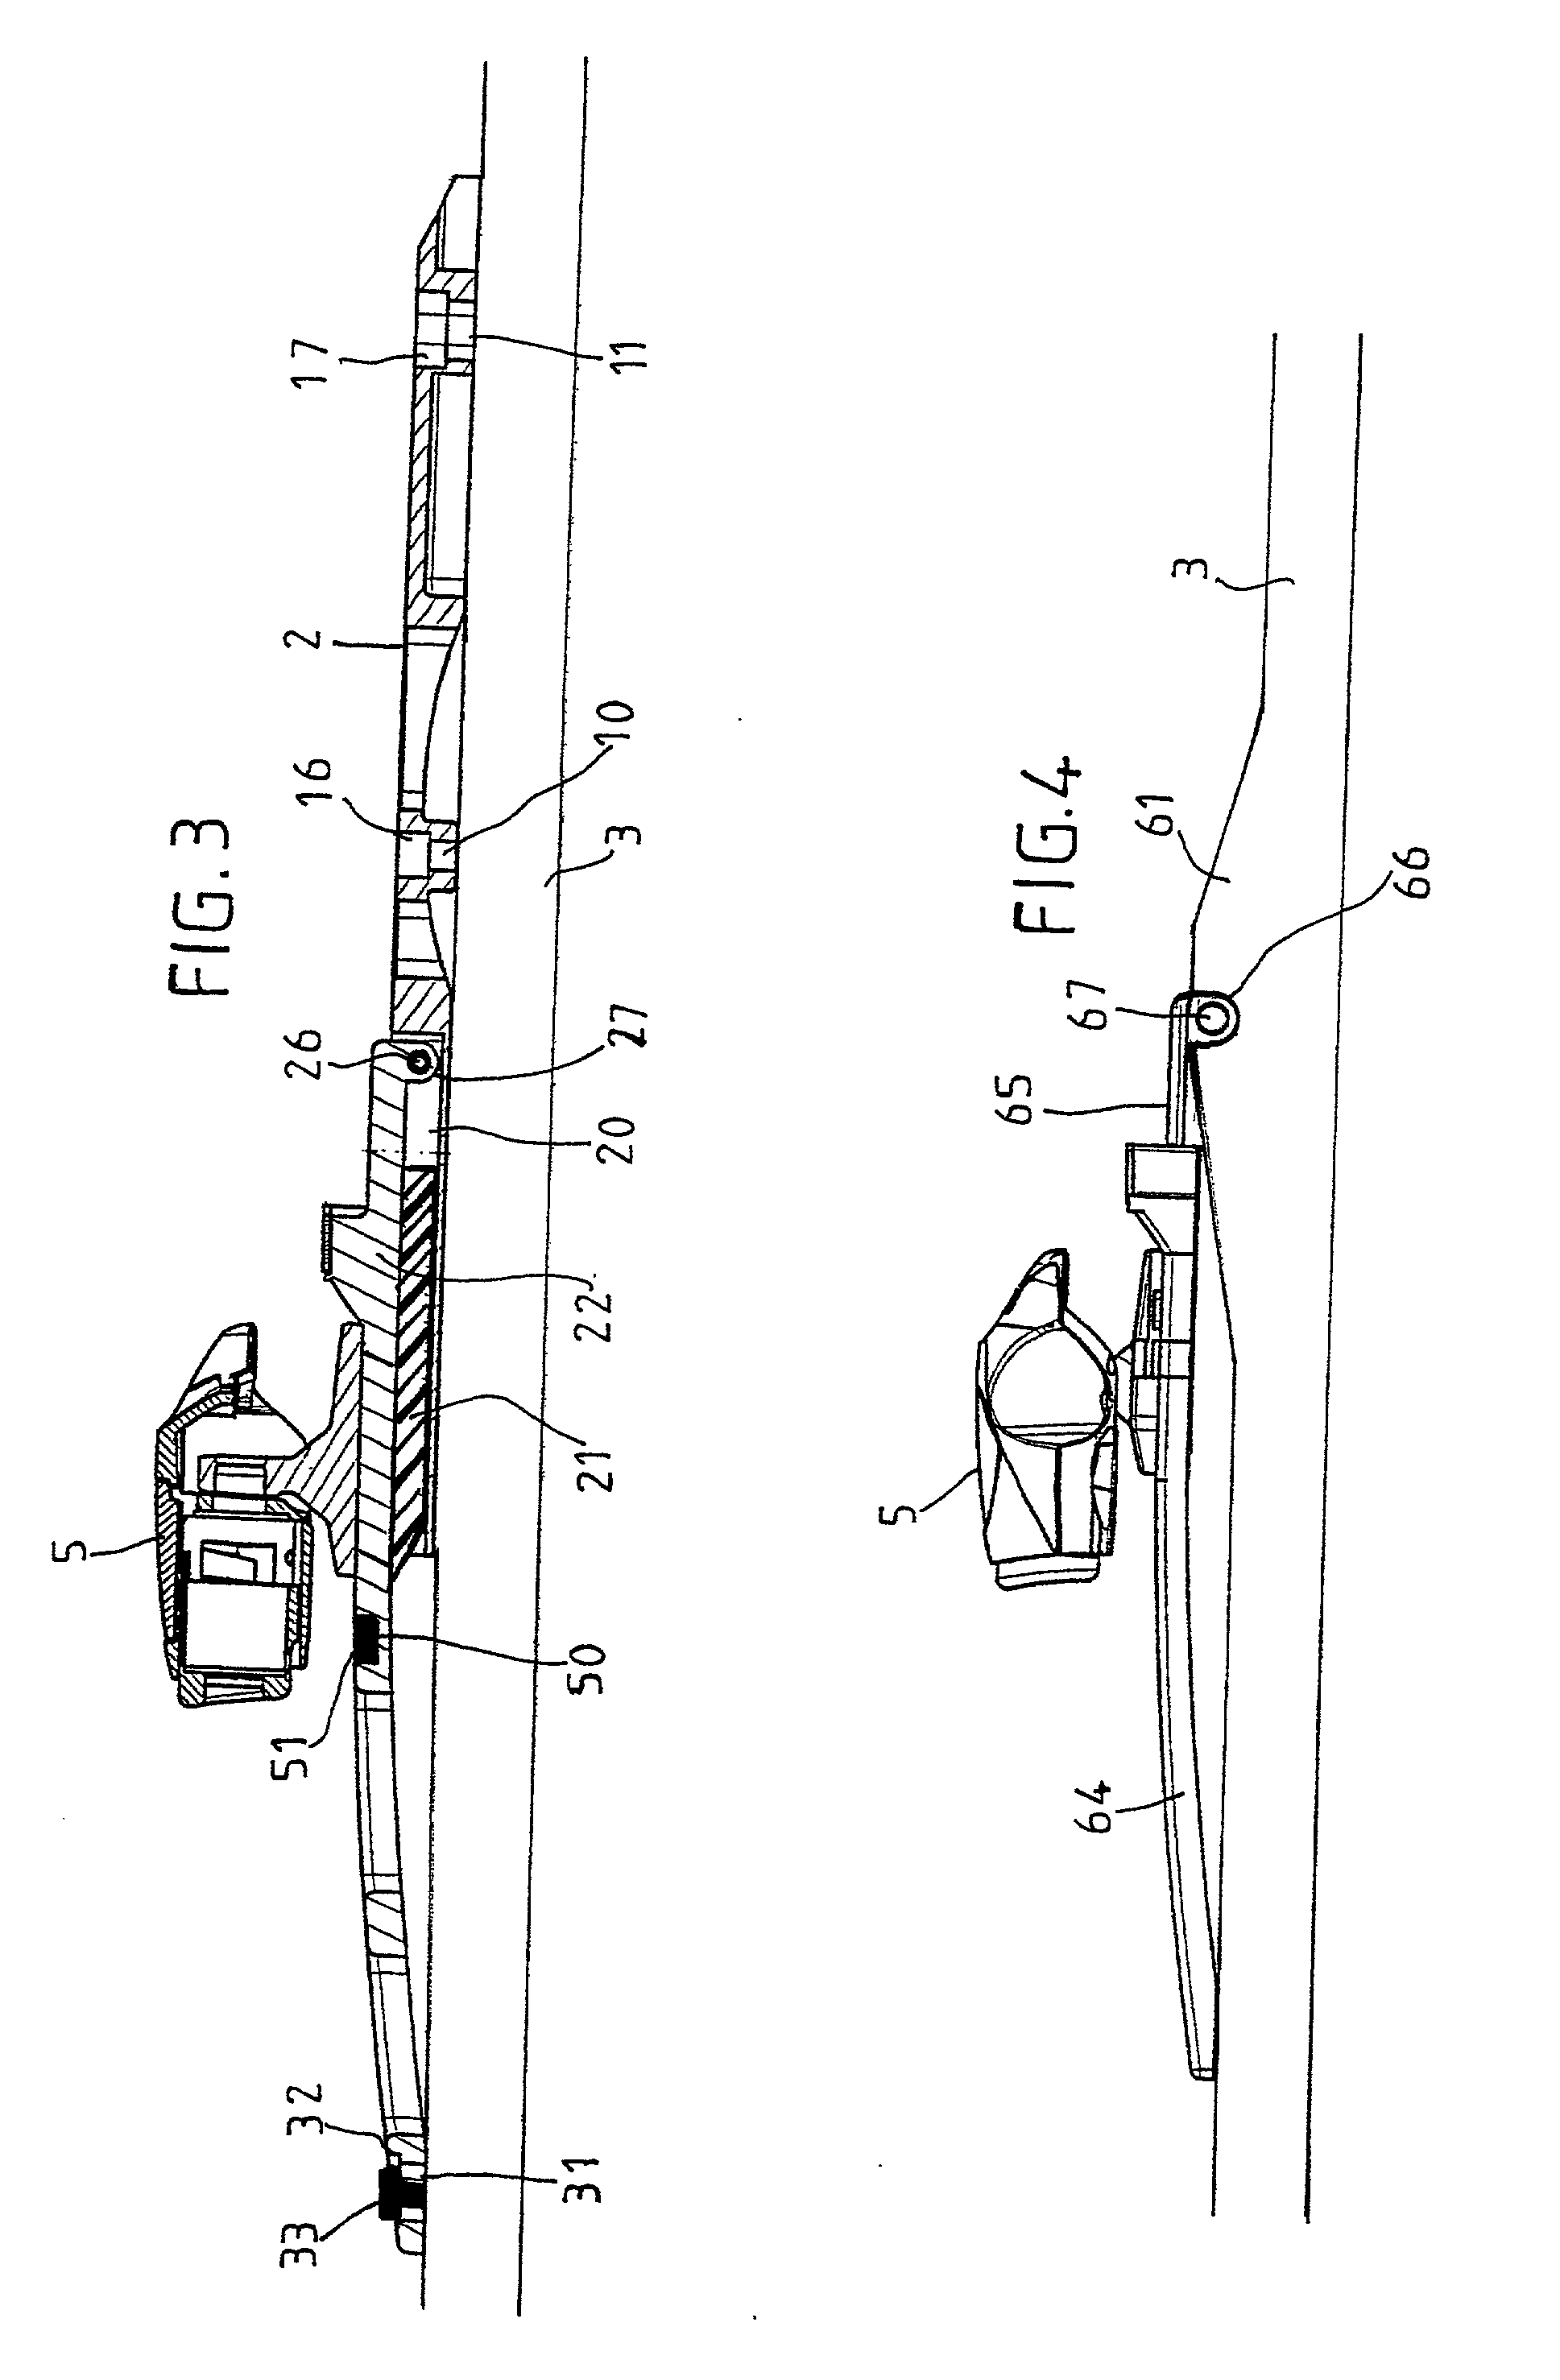 Device for raising at least one binding element used on a board for gliding